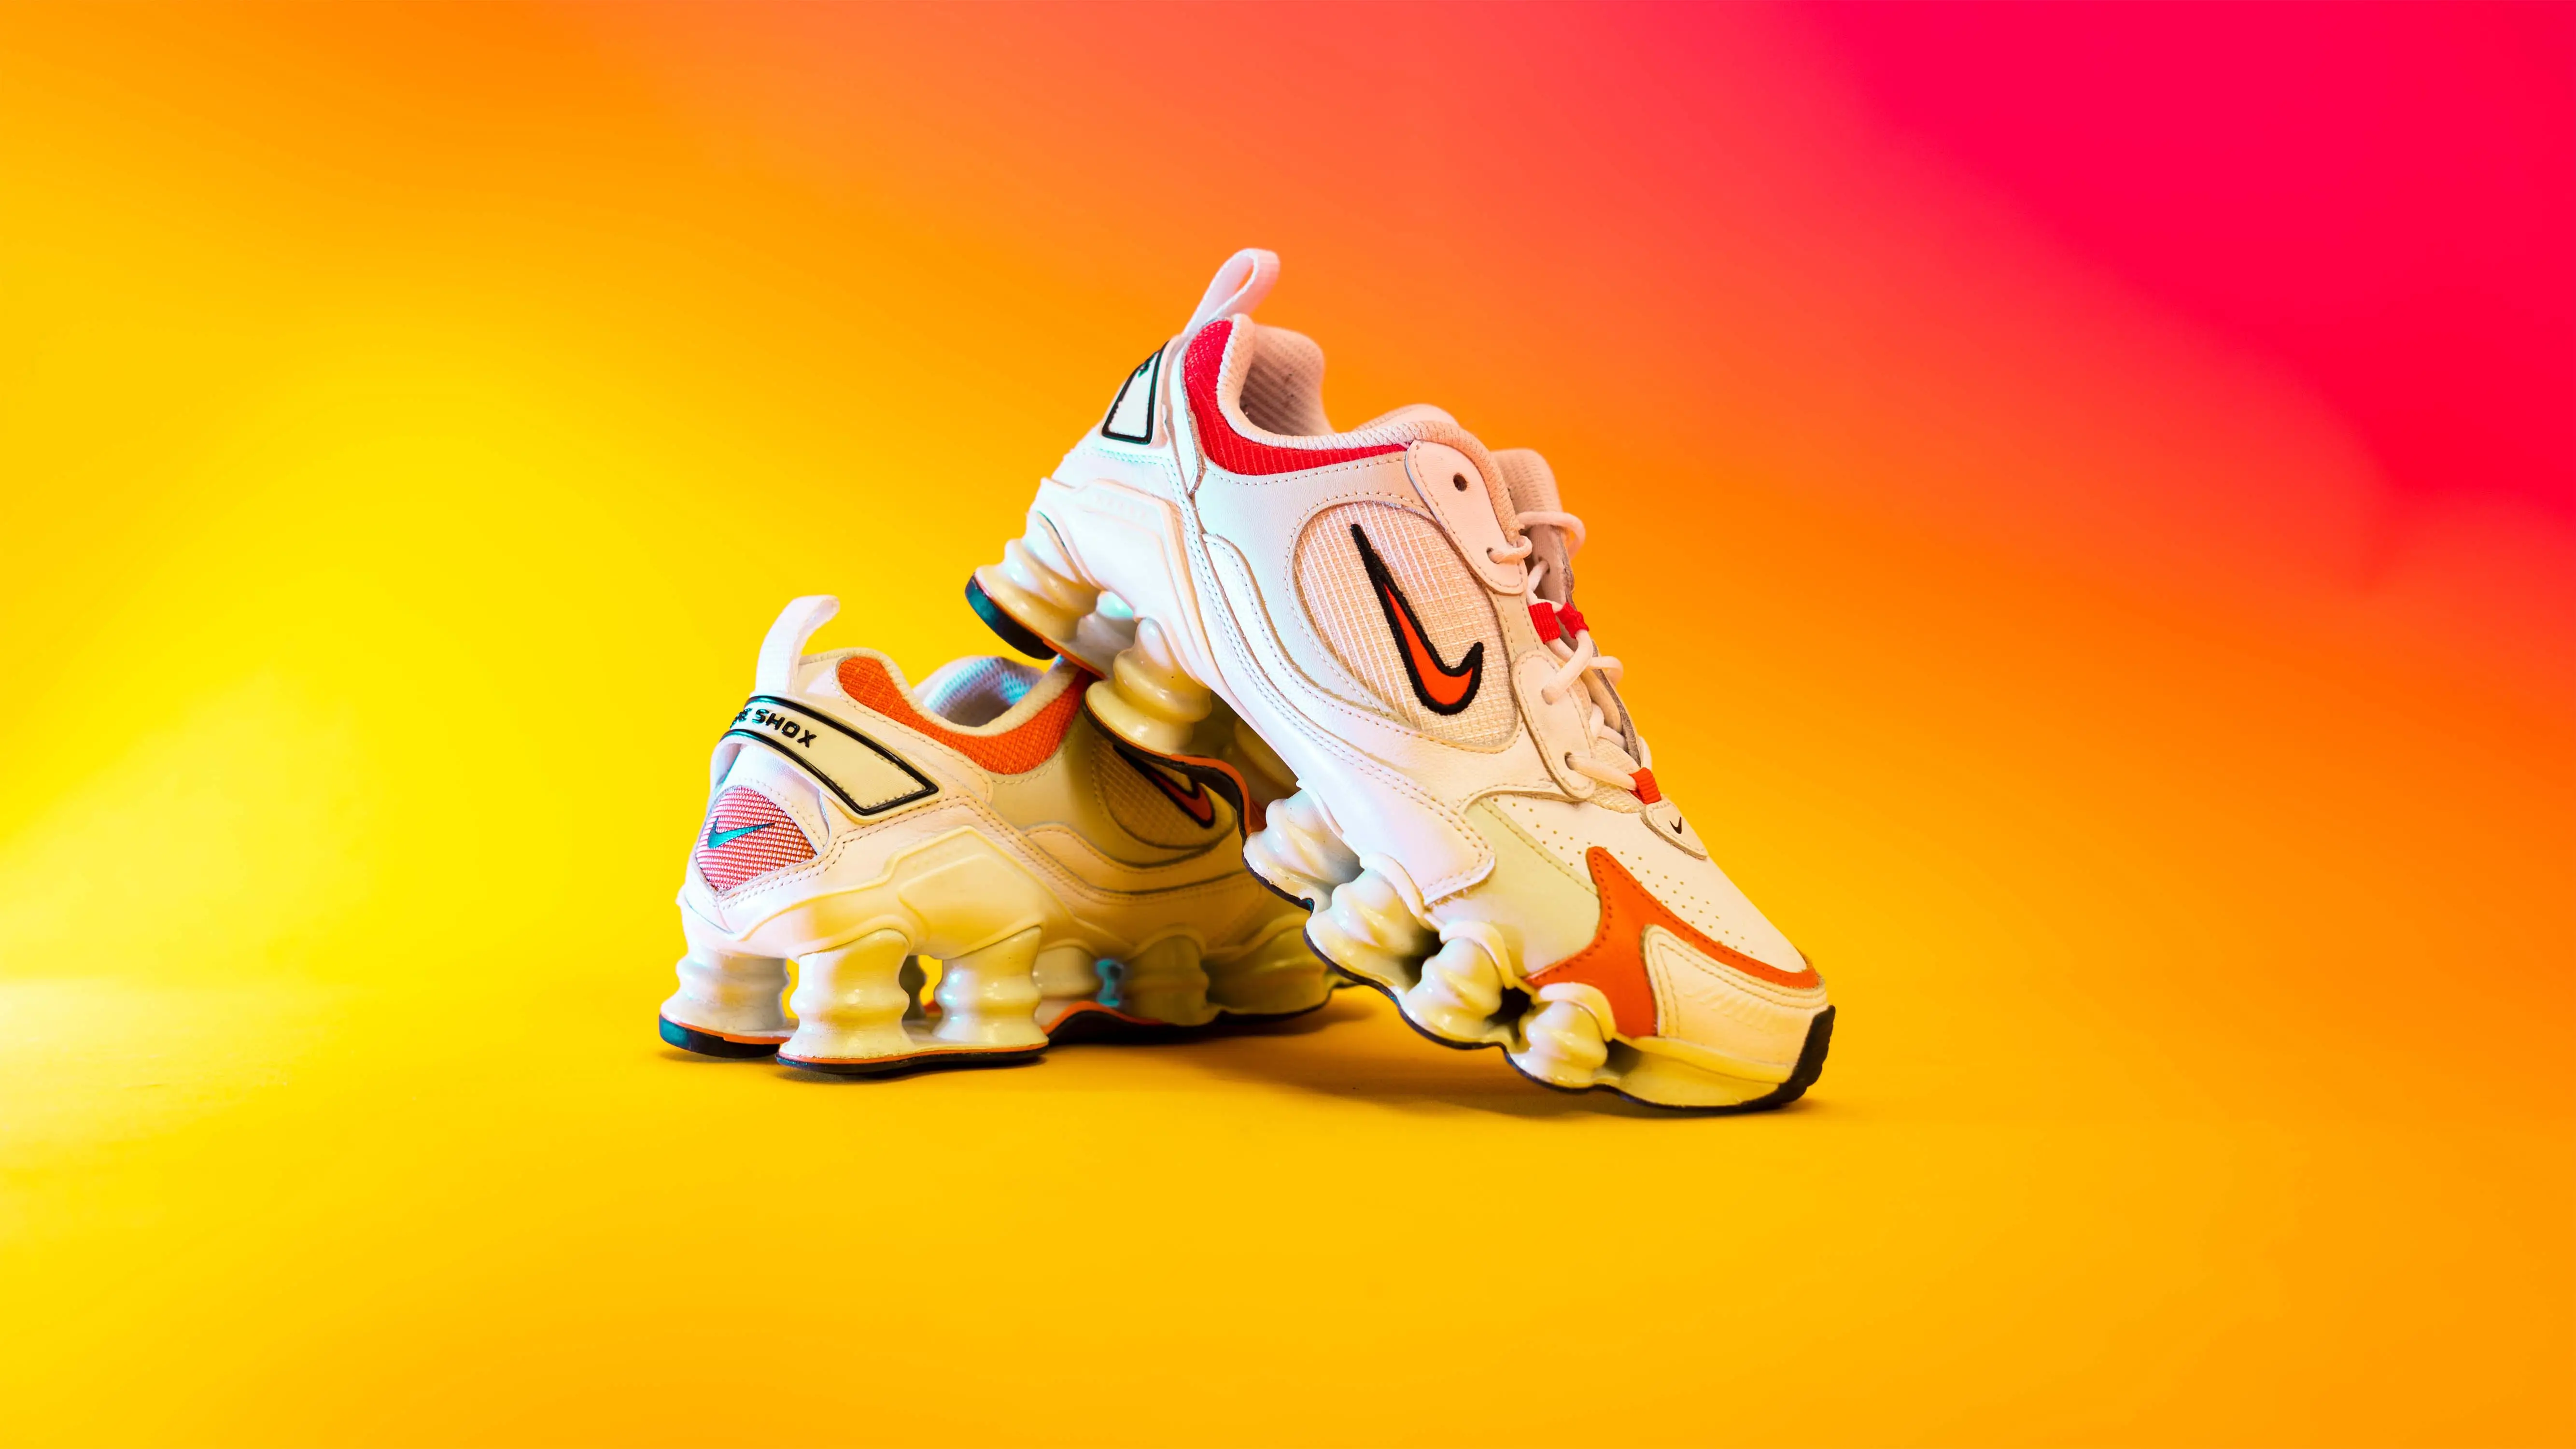 Discover: Why the Nike Shox Was Always Ahead of Its Time